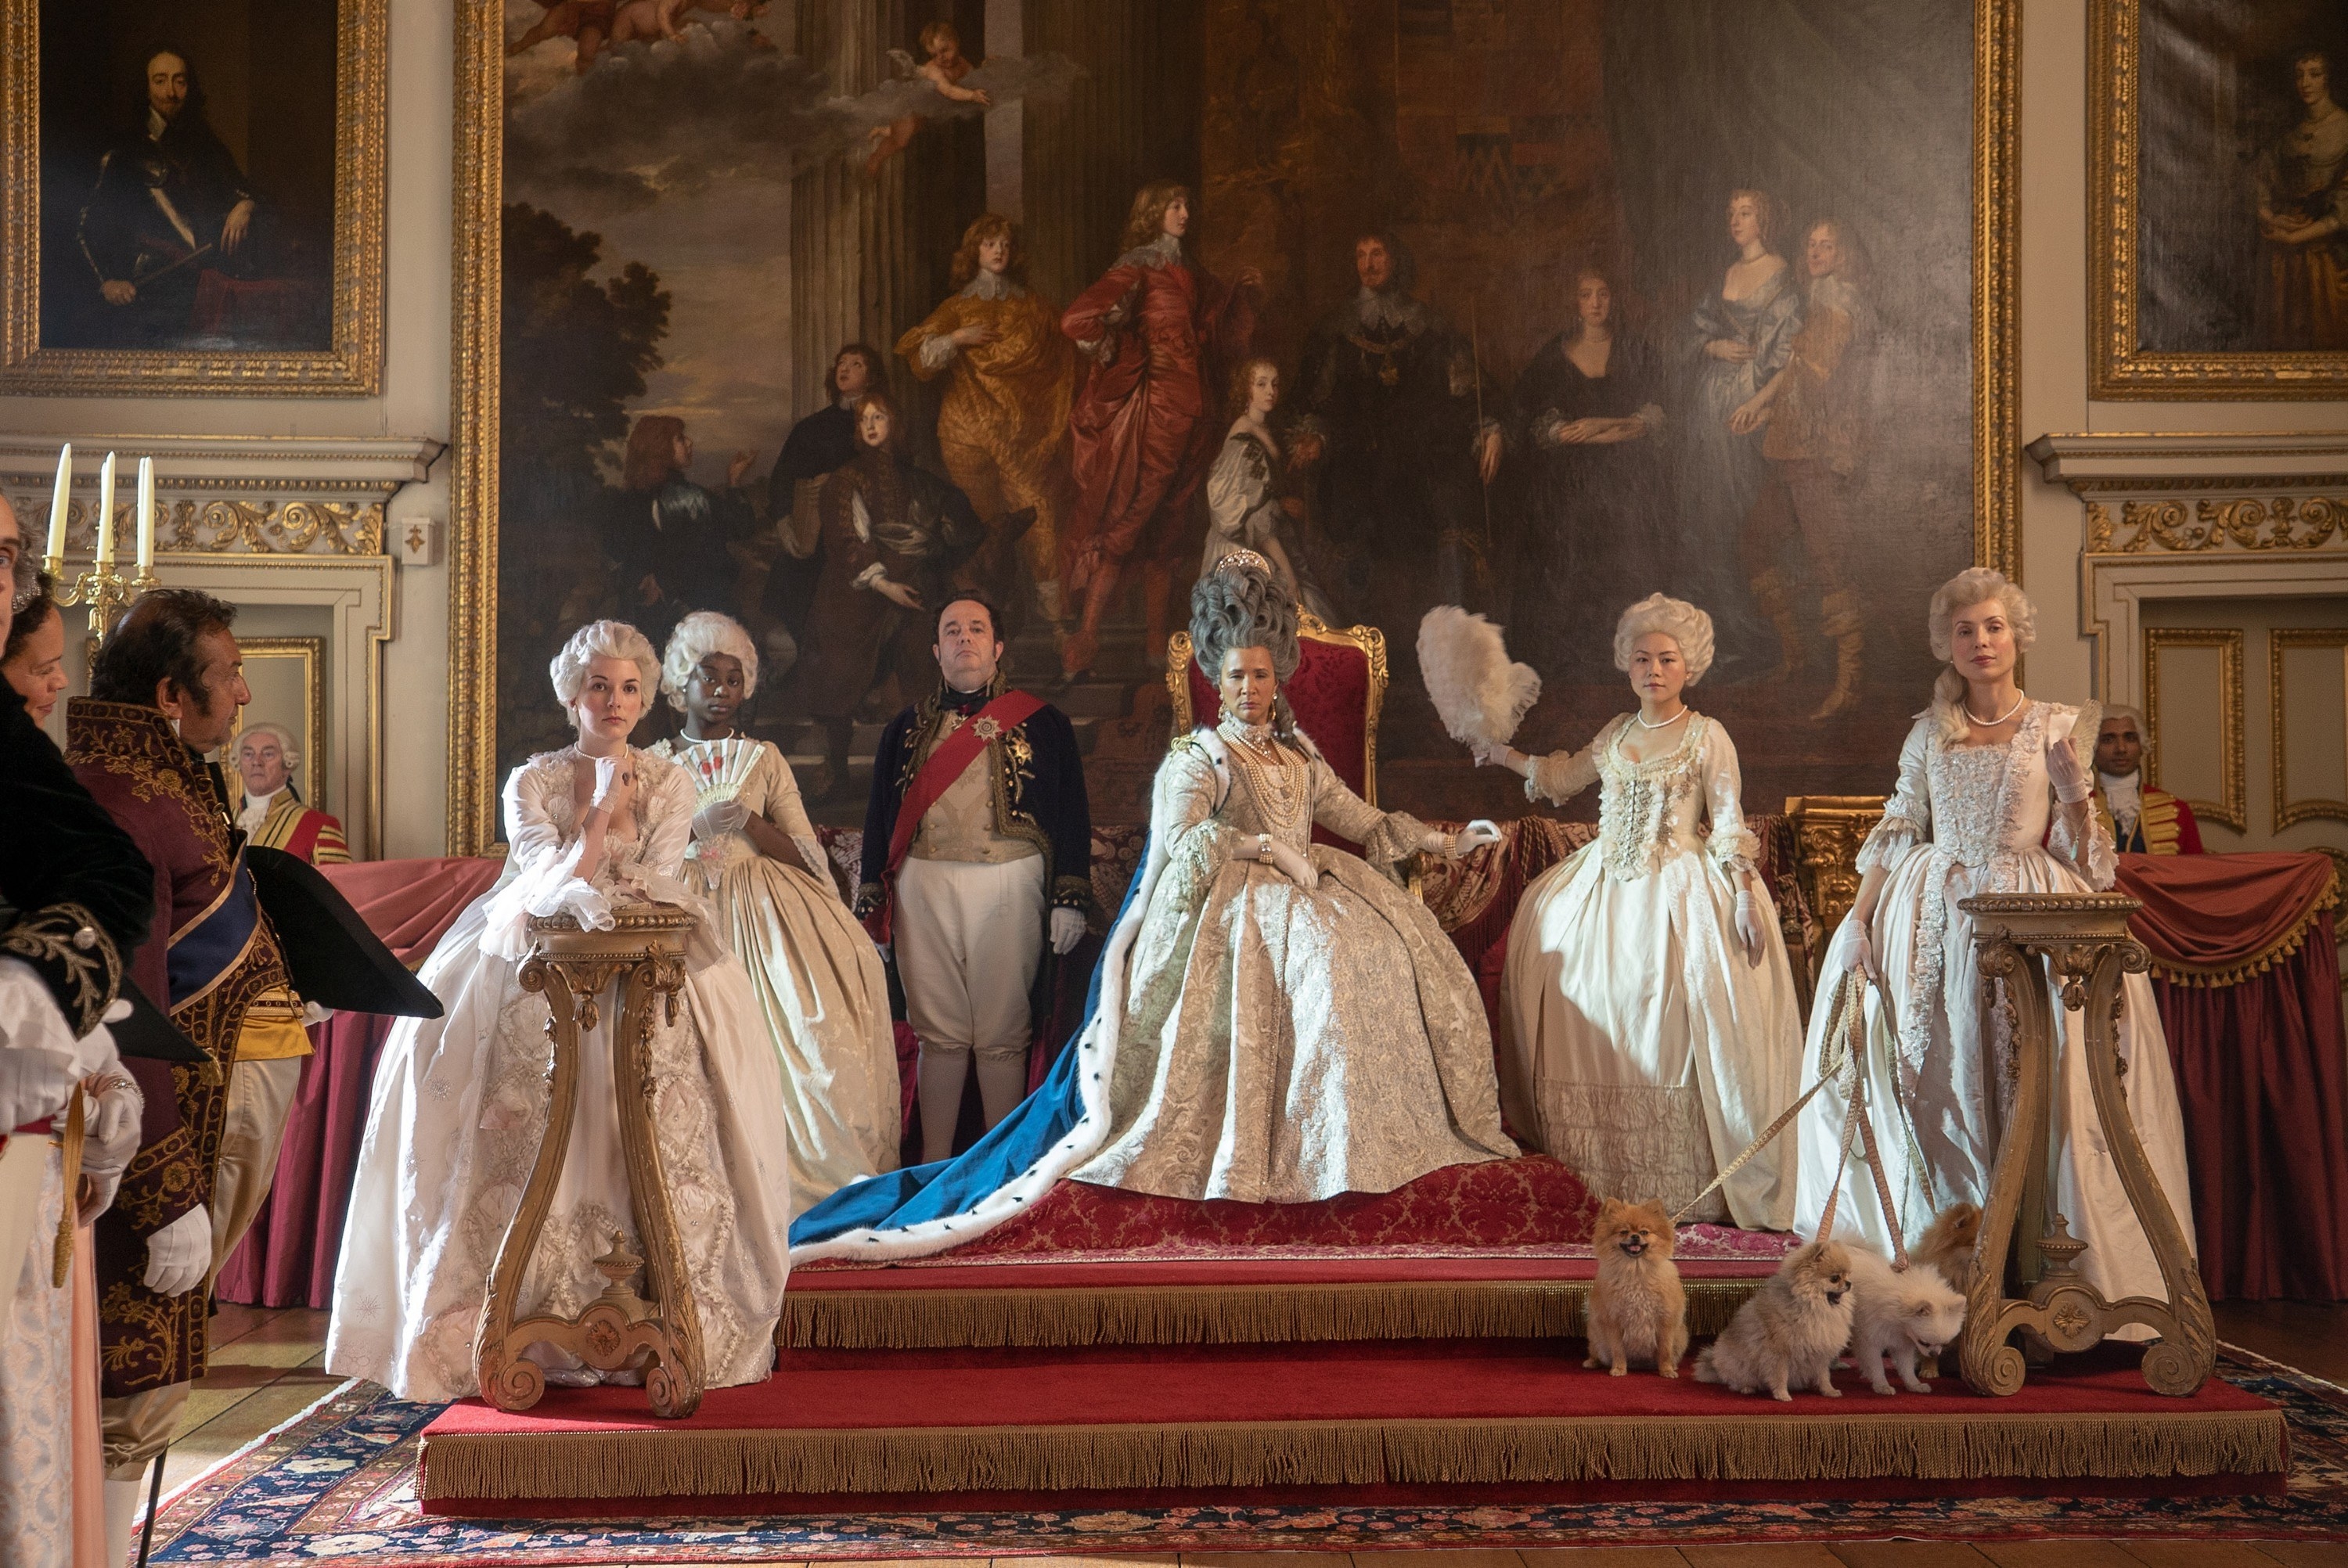 Golda Rosheuvel as Queen Charlotte sits on a throne surrounded by ladies-in-waiting and servants 